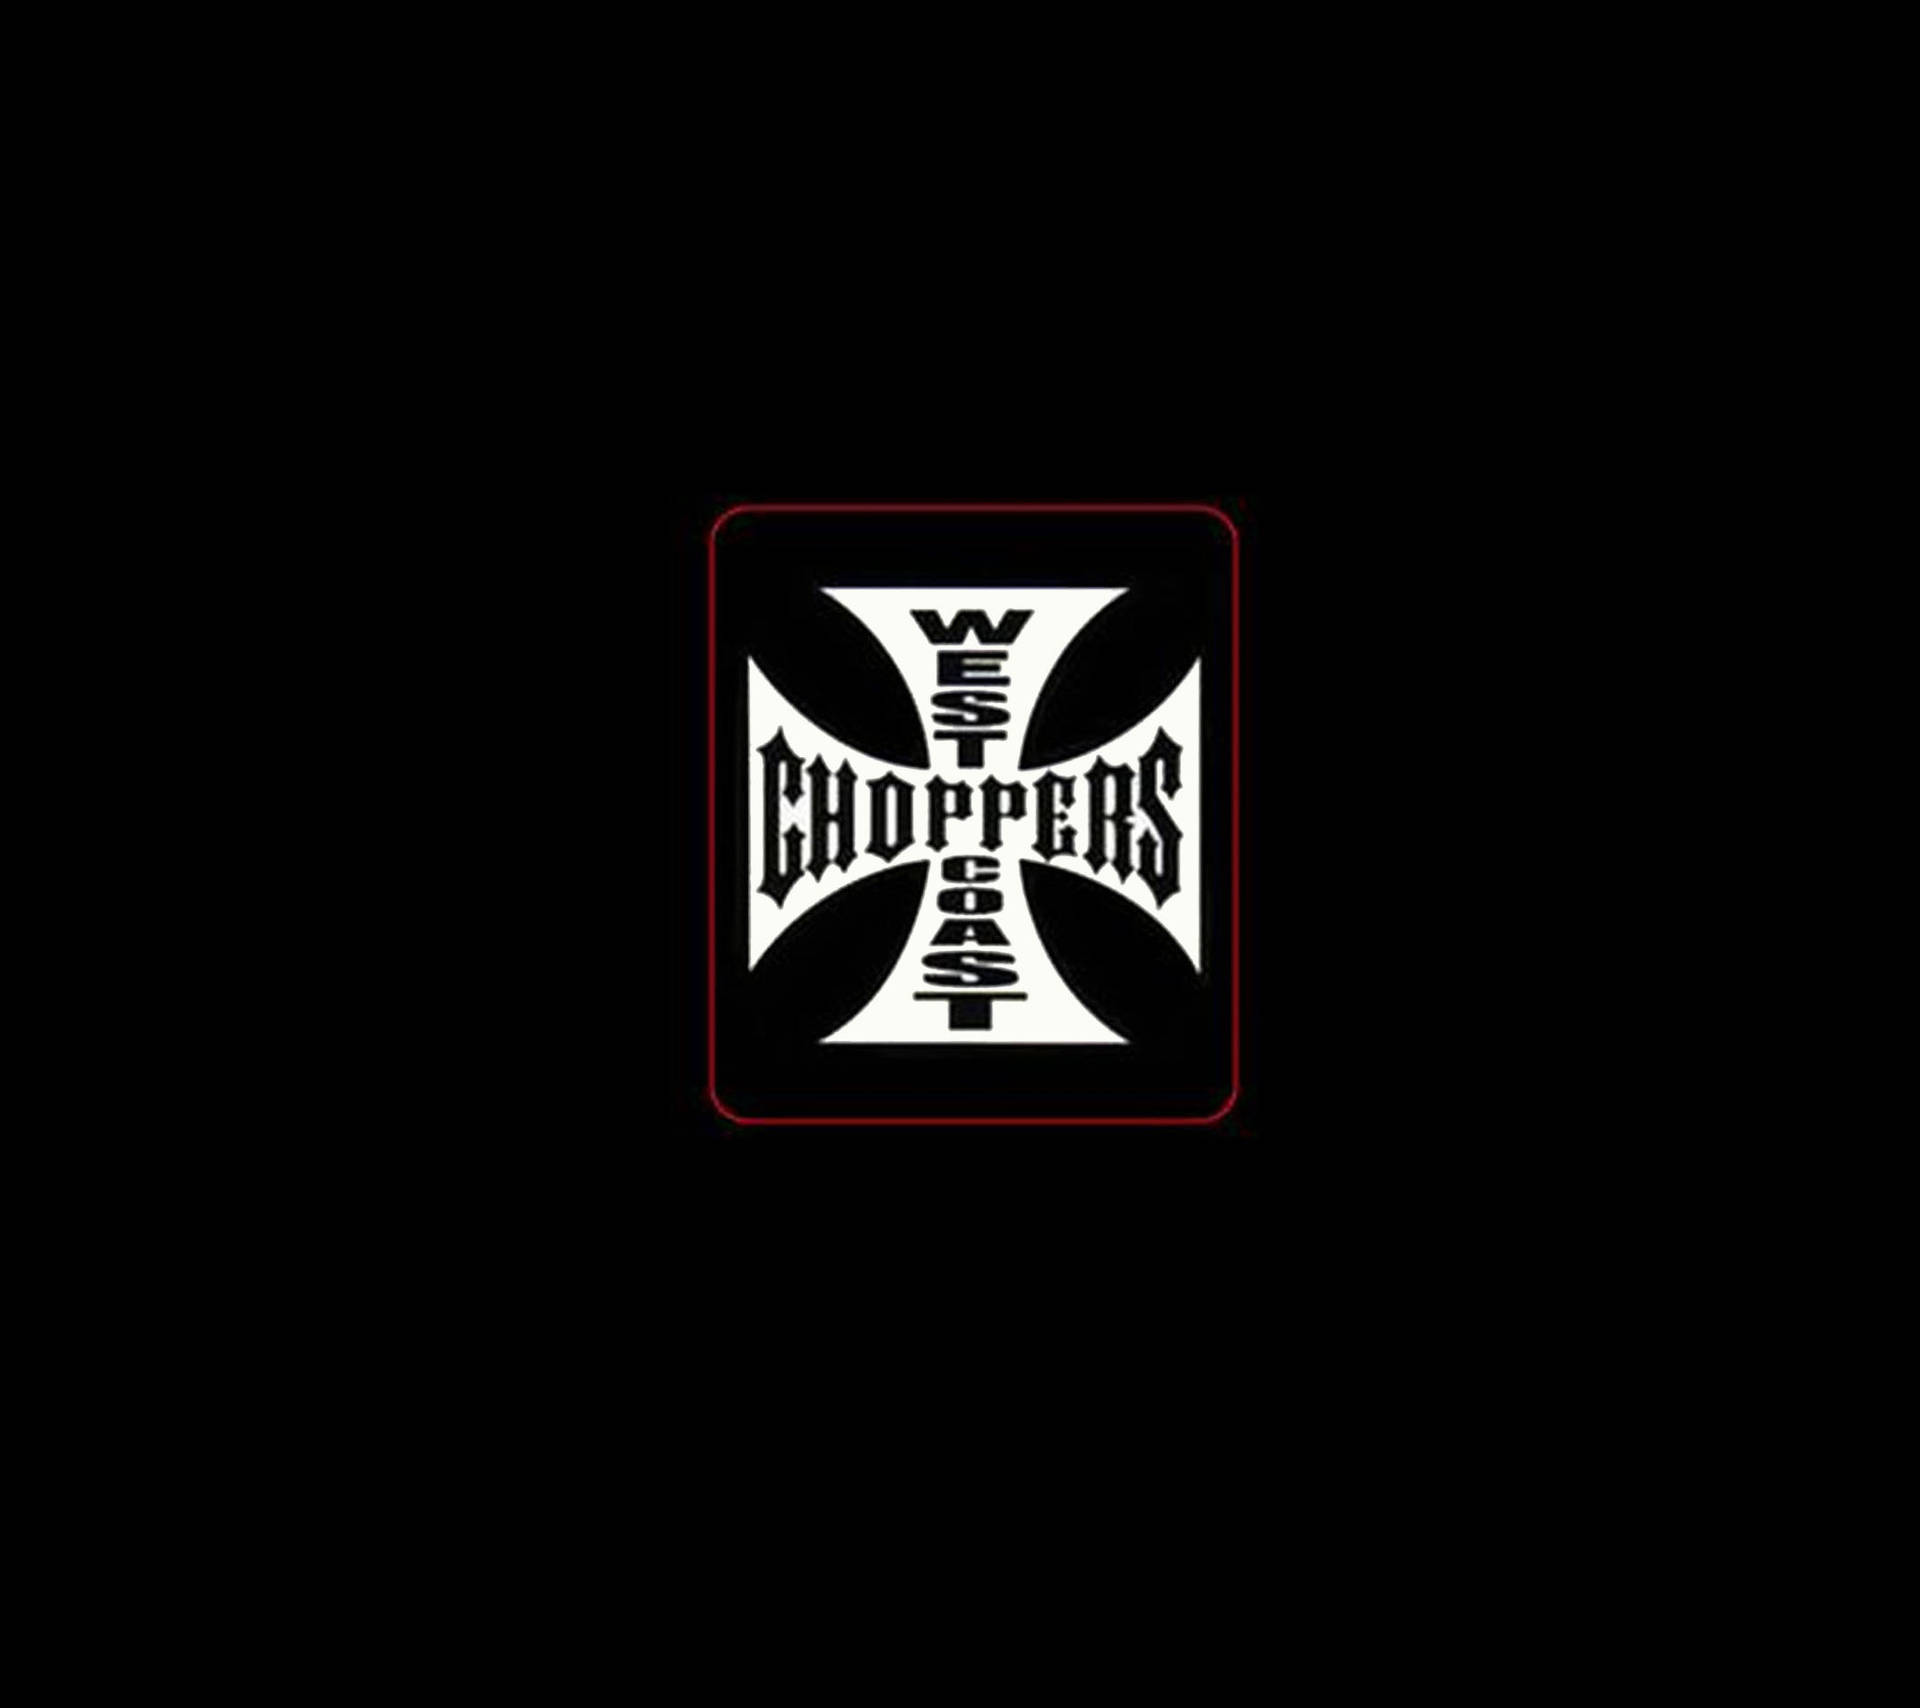 West Coast Choppers - Tradition Of Excellence